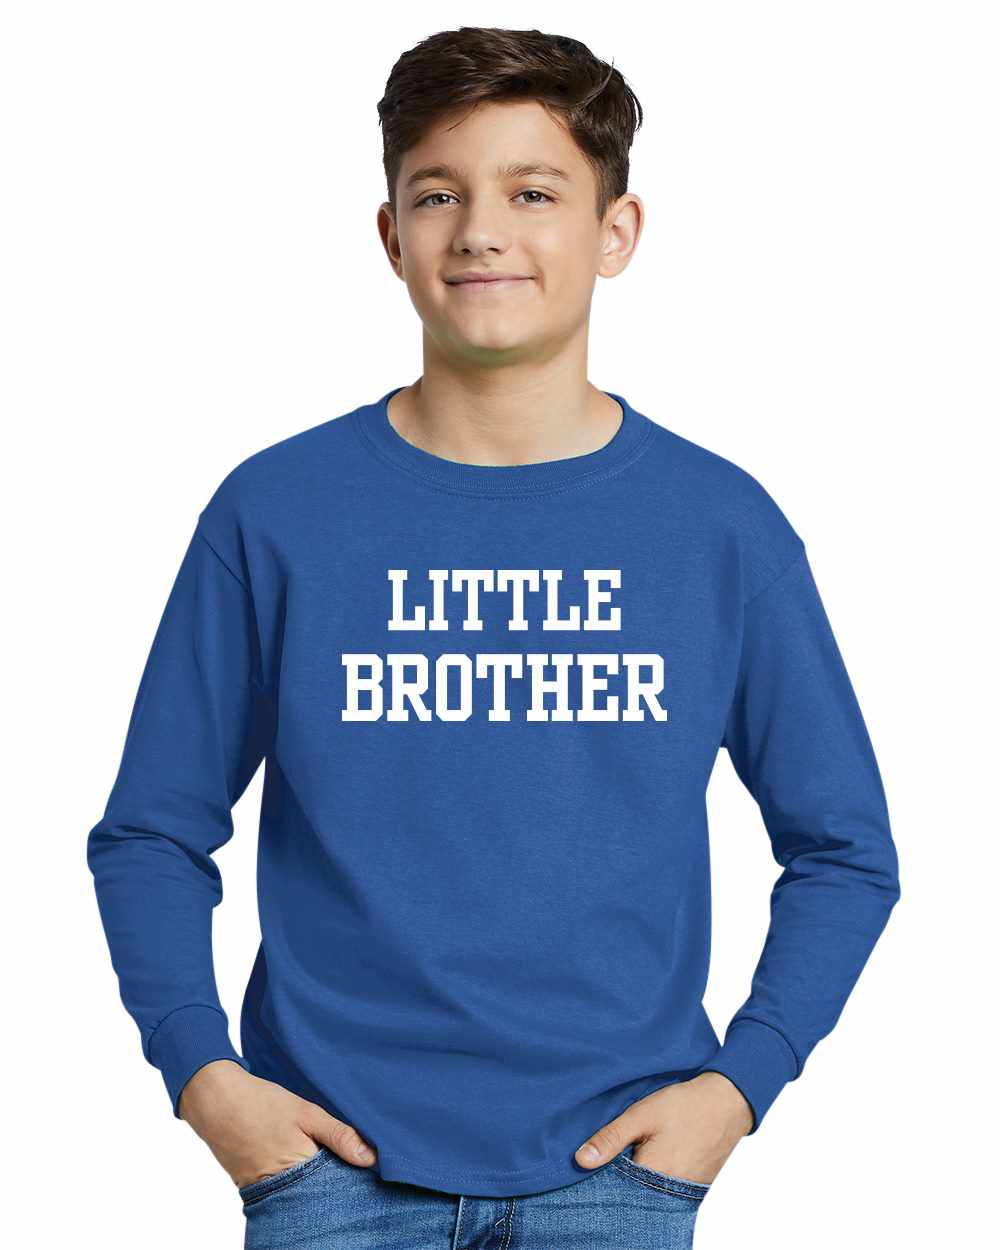 LITTLE BROTHER on Youth Long Sleeve Shirt (#1111-203)